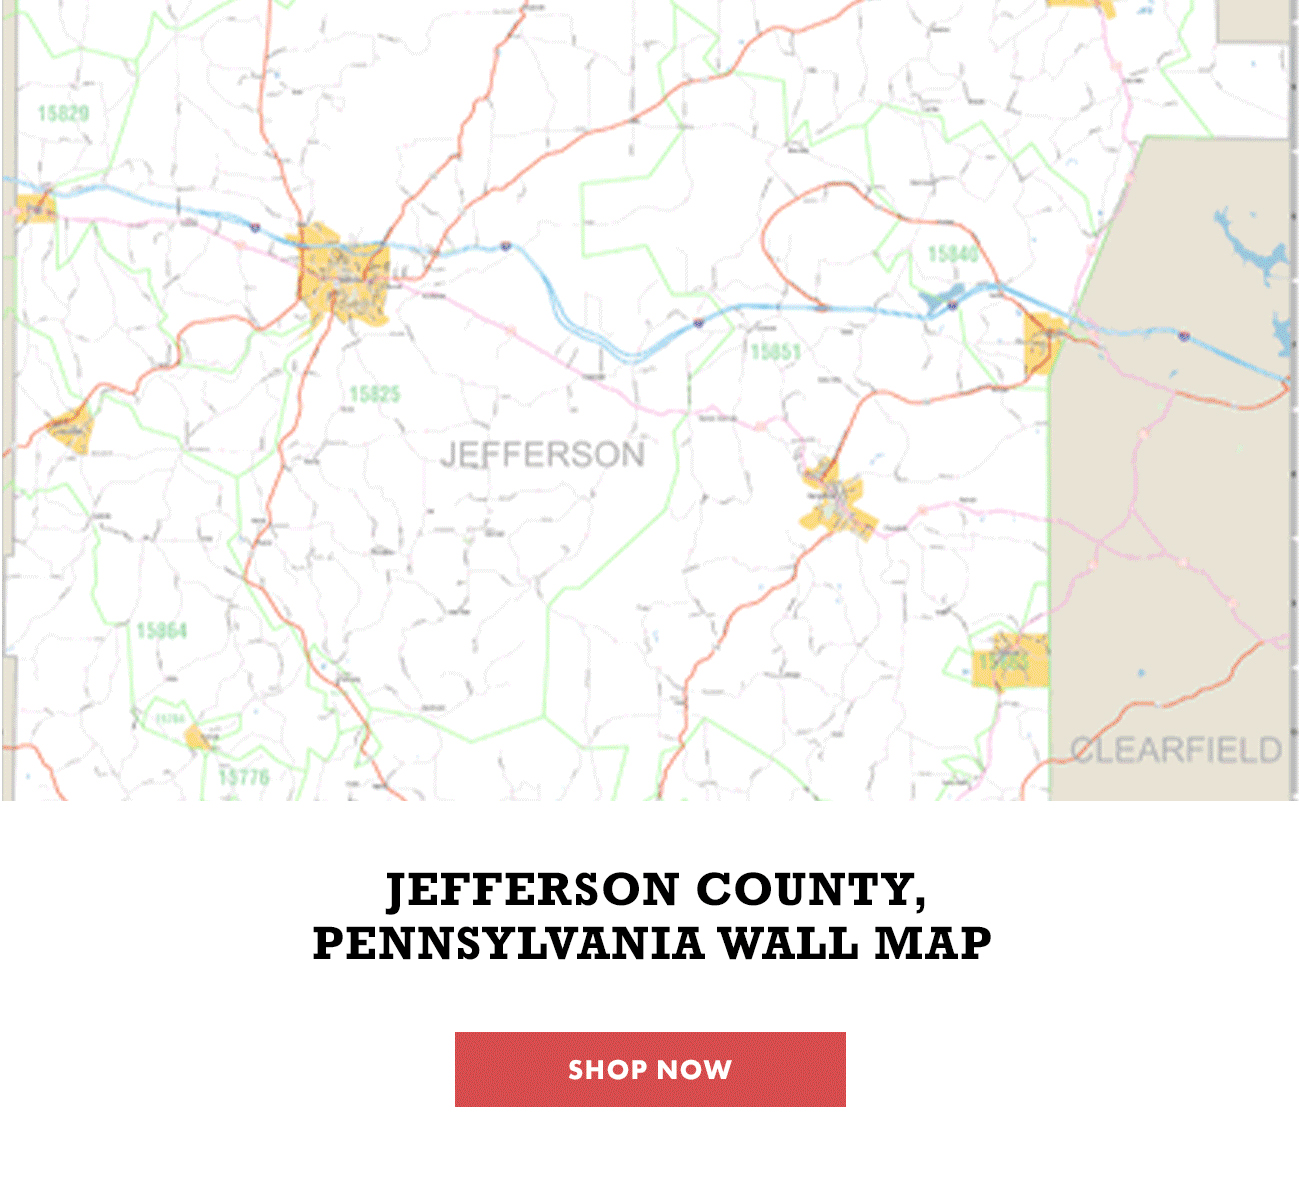 Jefferson Country Pennsylvania Wall Map Shop Now